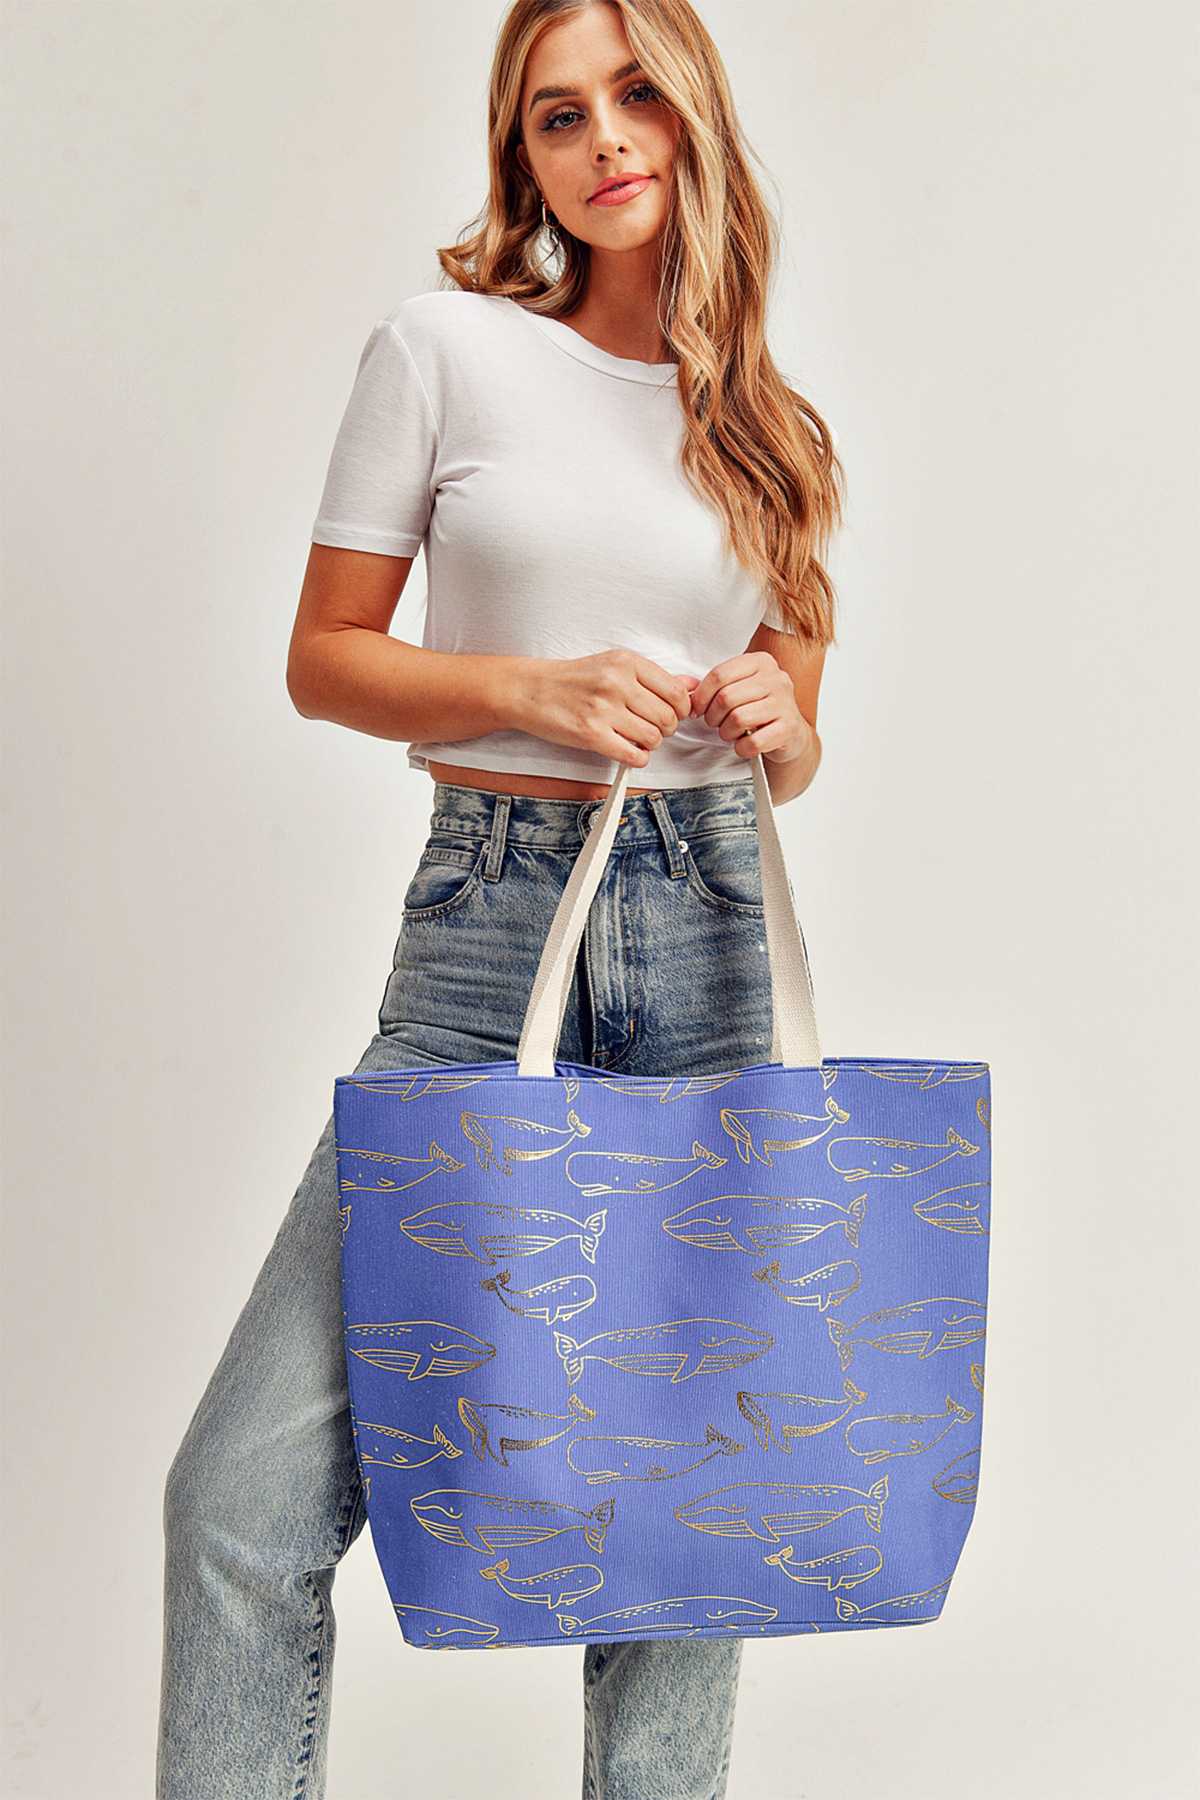 Gold Foil Whale Tote Bag